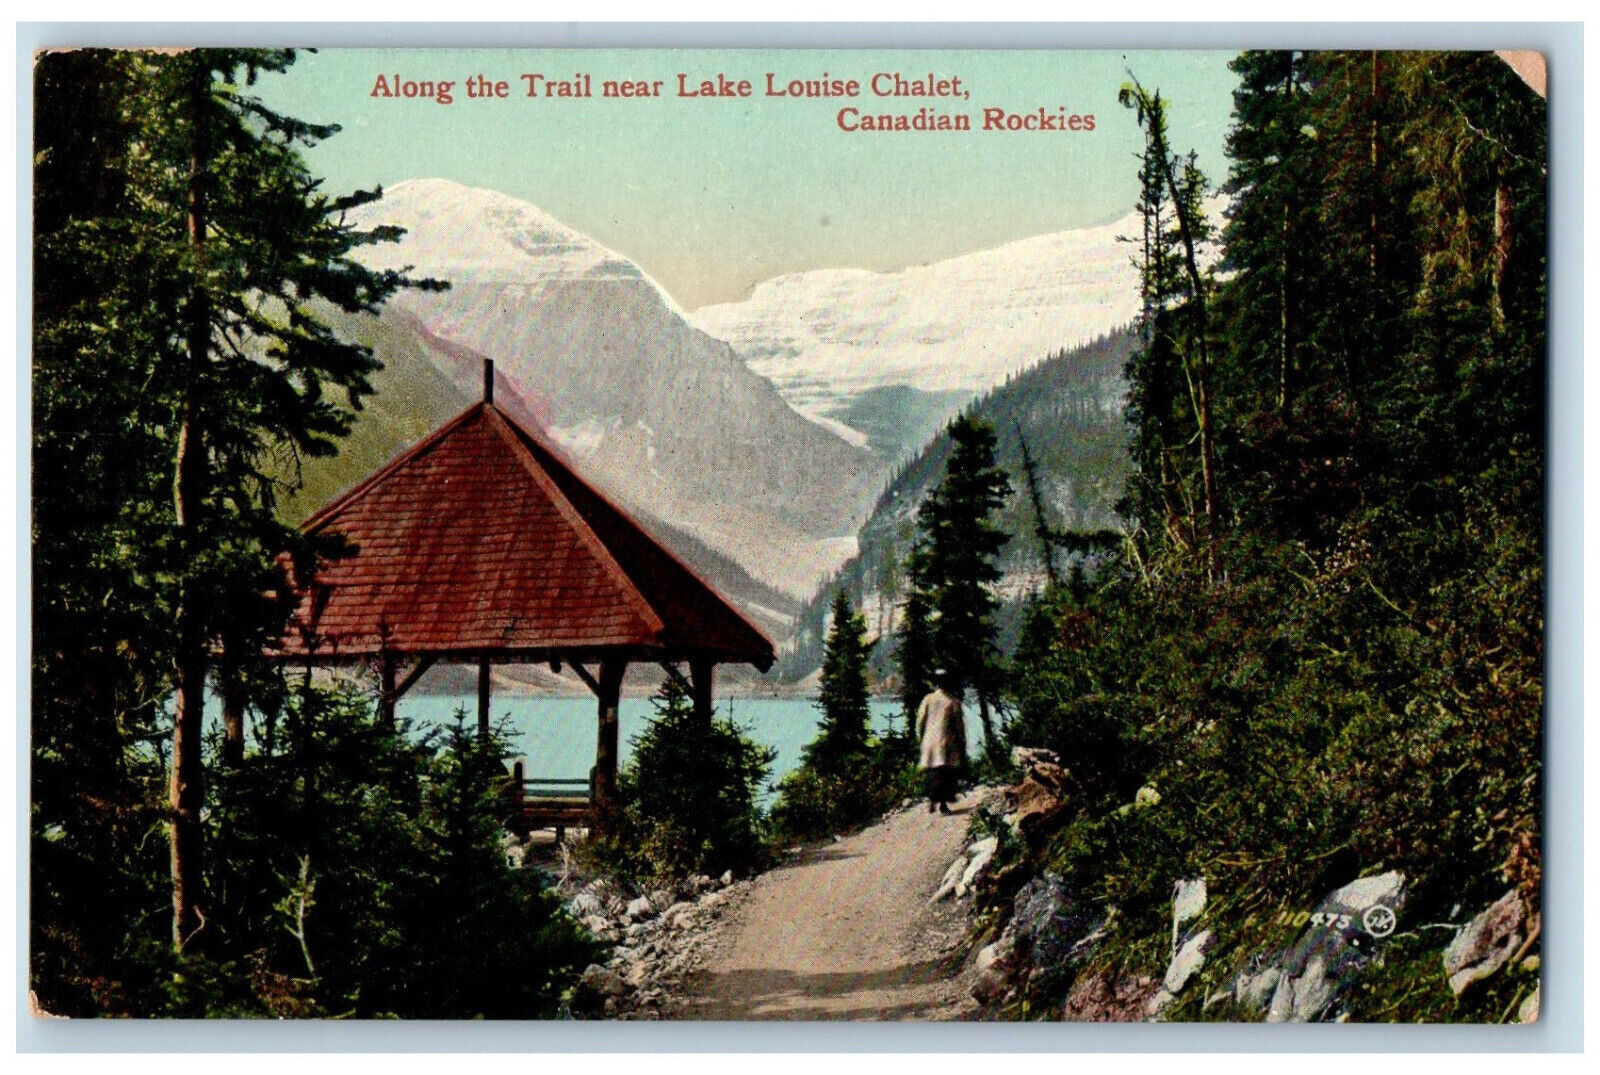 Canadian Rockies Canada Postcard Along The Trail Near Lake Louise Chalet c1910